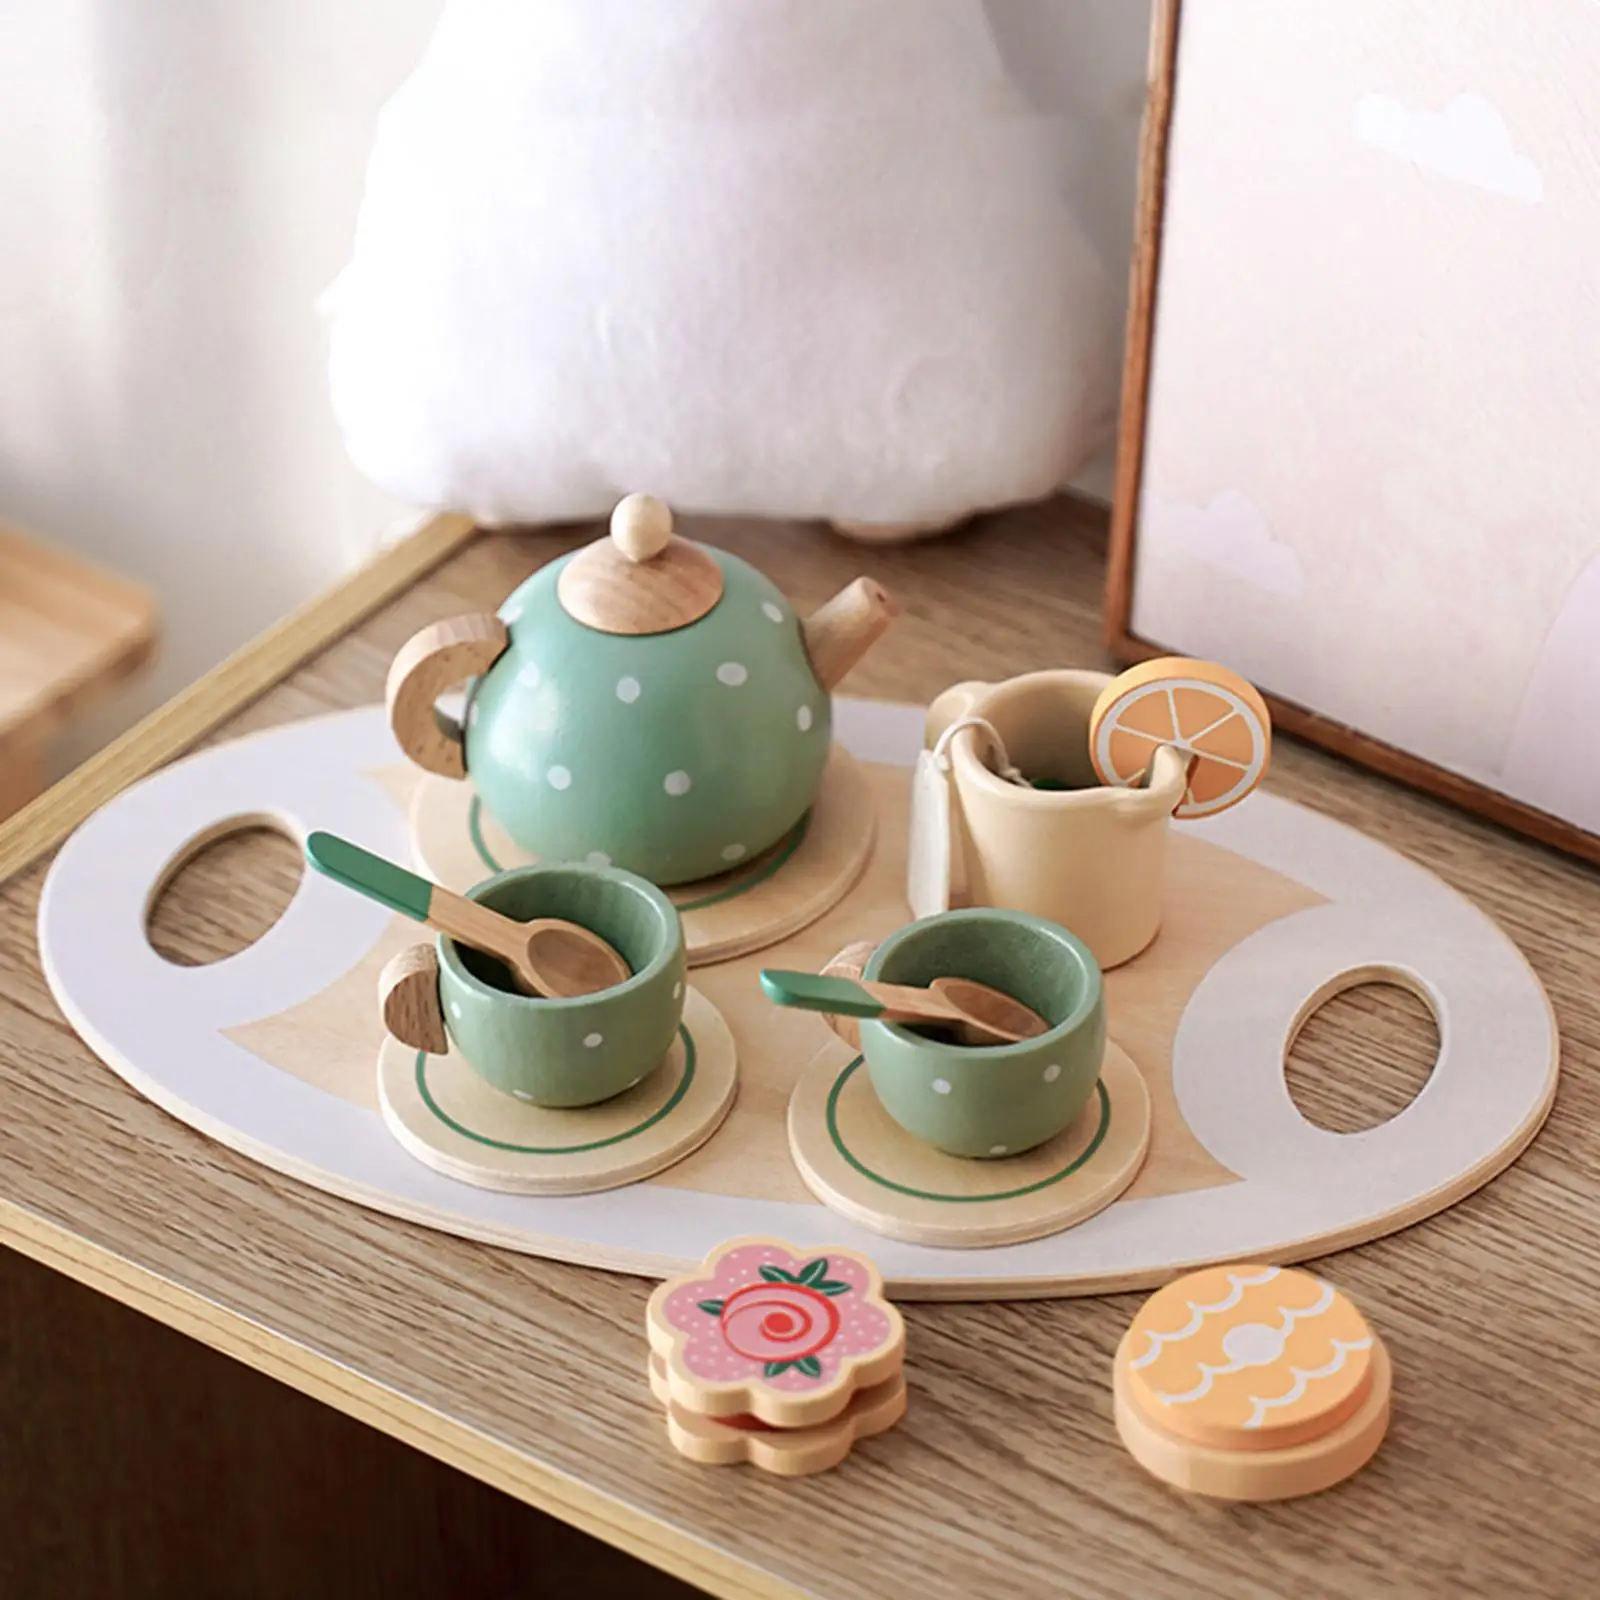 Wooden Afternoon Tea Set Toy Pretend Play Food Learning Role Play Game Early Educational Toys for Toddlers Girls Boys Kids Gifts